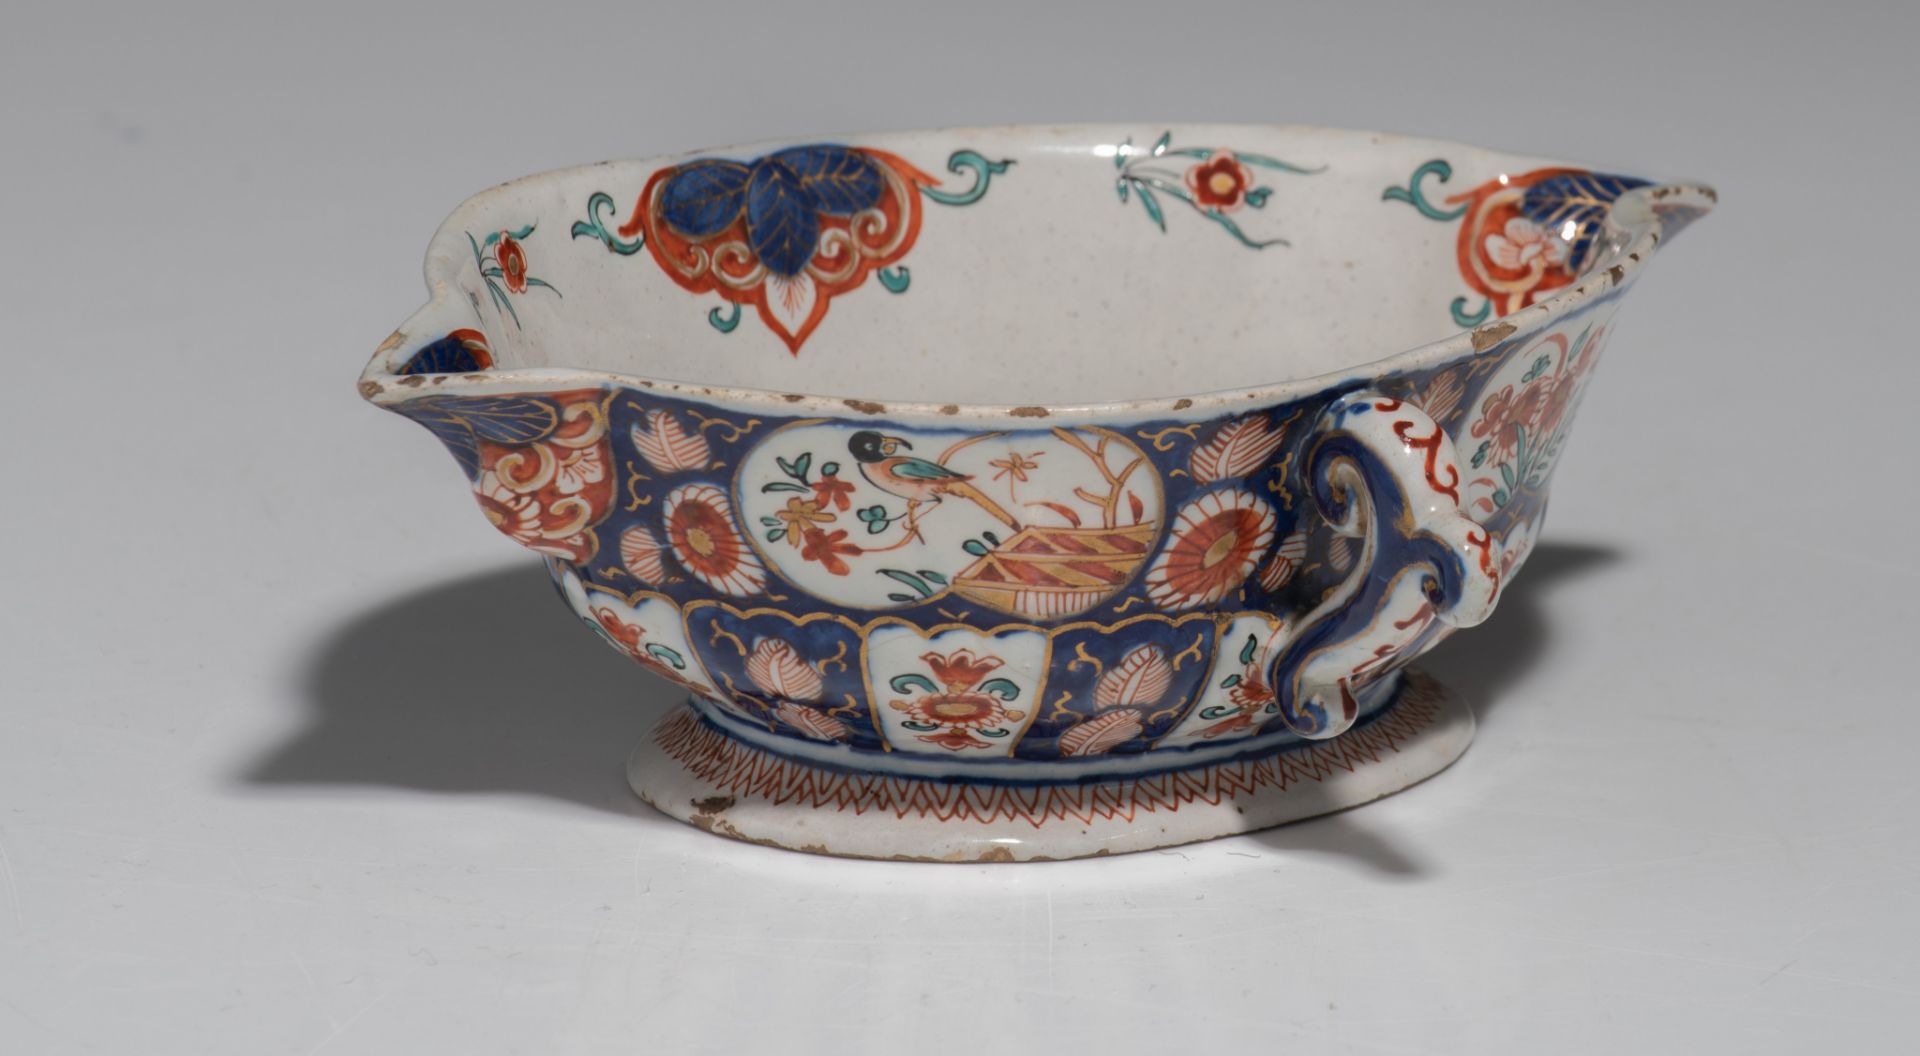 A various collection of 17th/18thC Dutch Delft Imari-style plates and a saucer, ø 22 / H 6 cm - Image 14 of 14